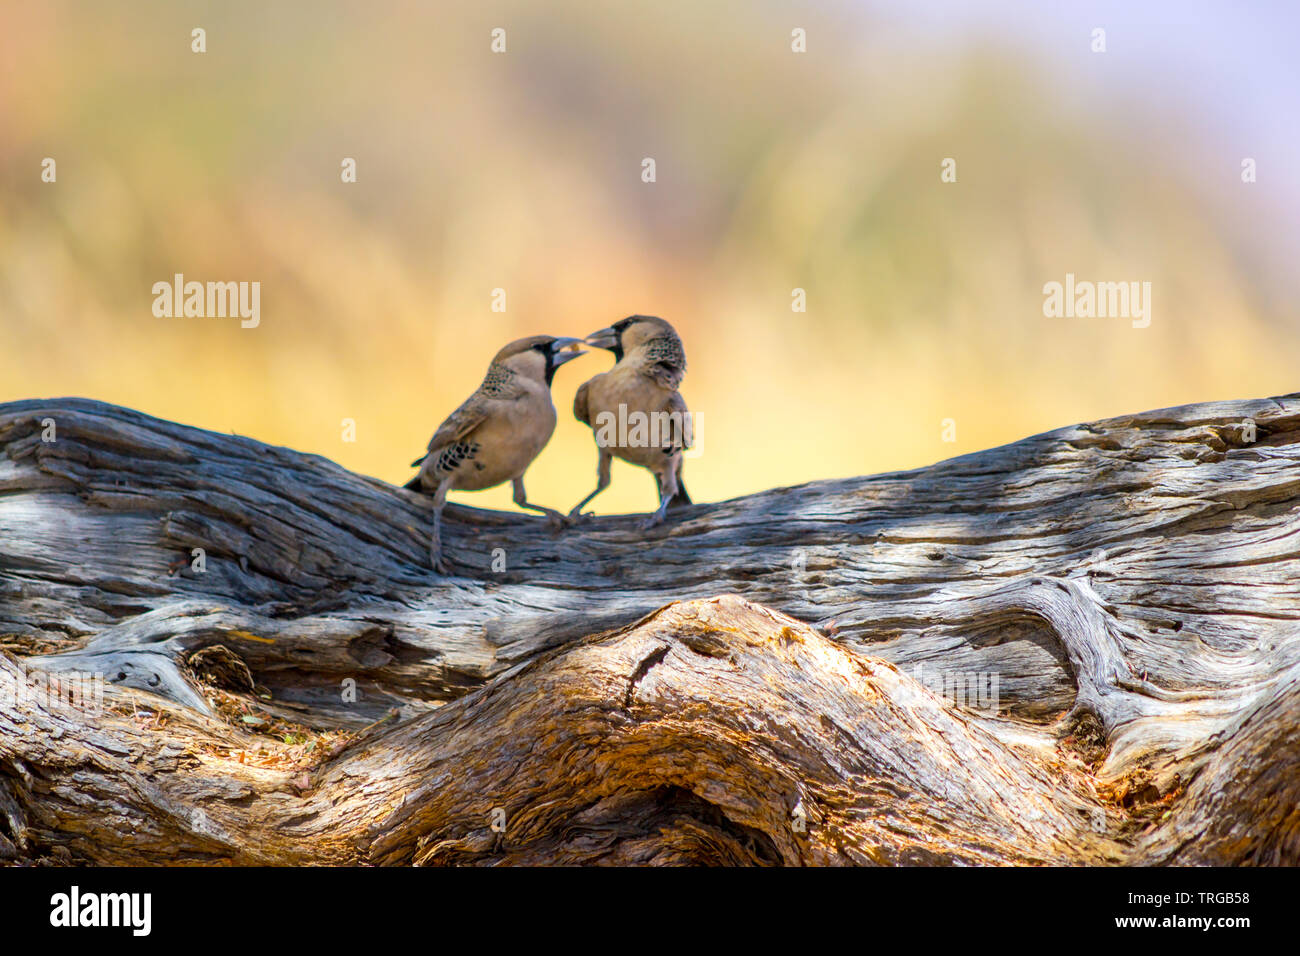 Two sparrows sitting on a branch of wood, playing with food Stock Photo